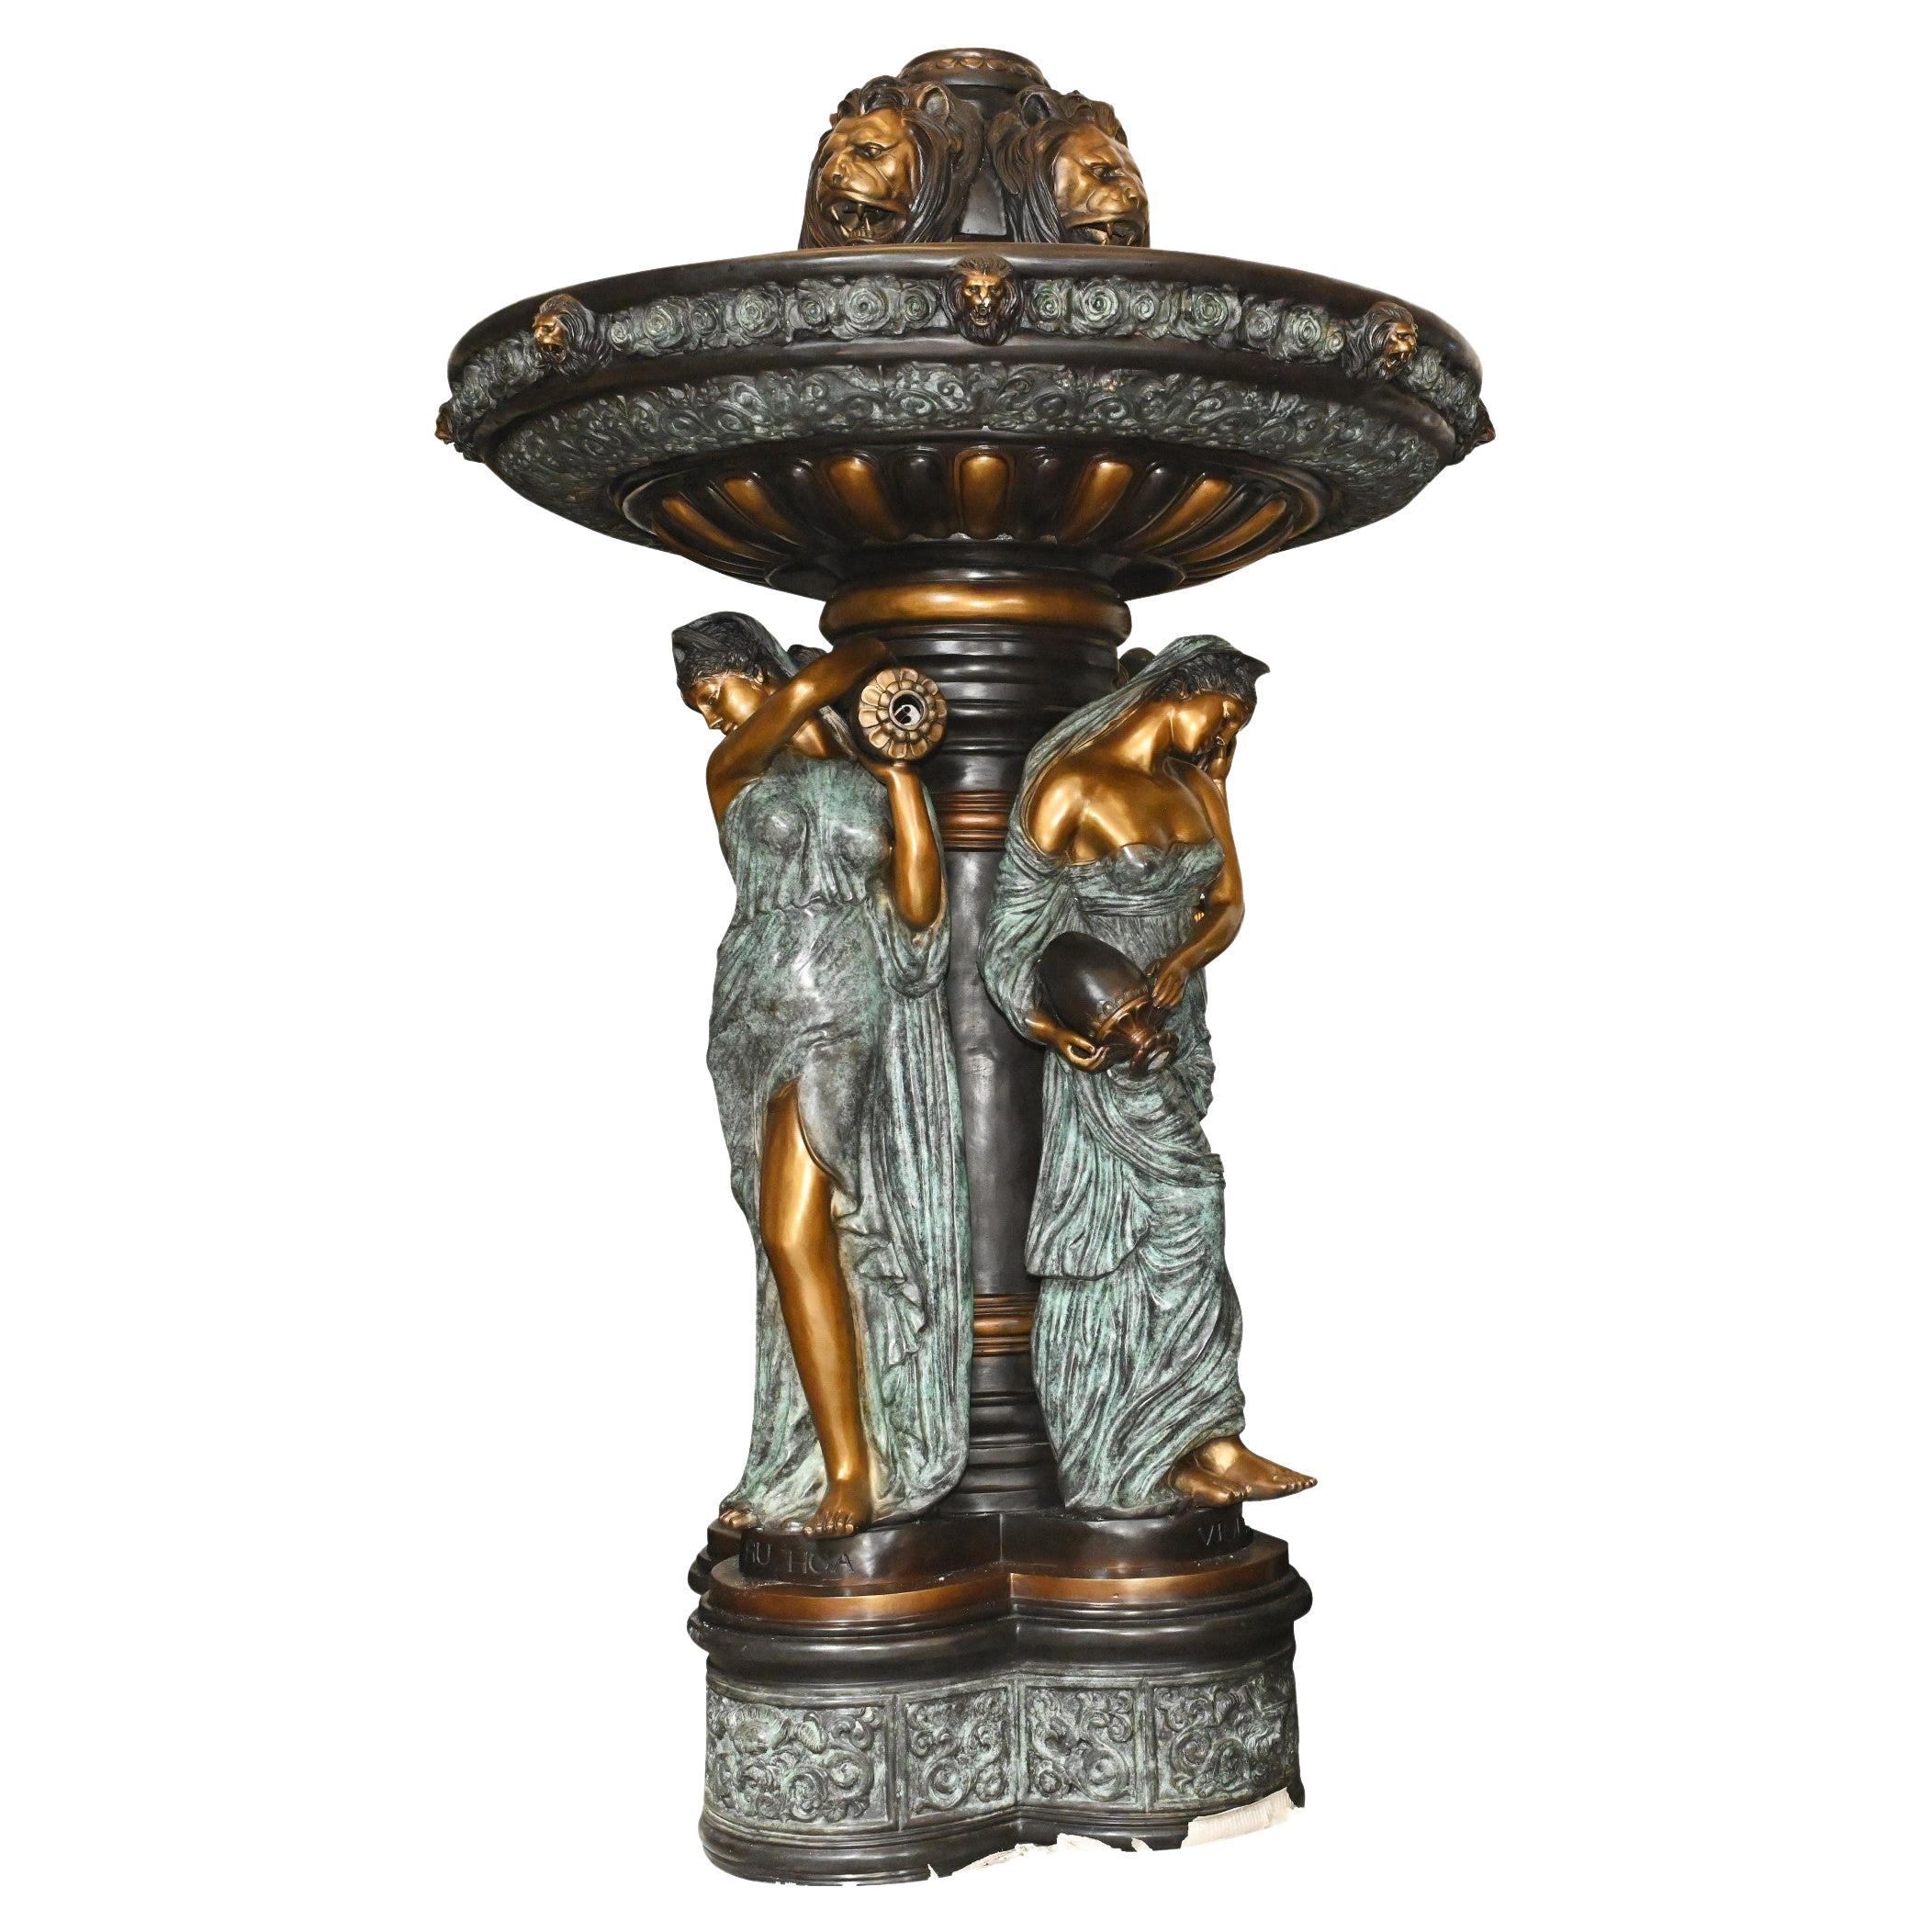 Italian Bronze Fountain, Large Classical Maiden Garden Water Feature For Sale